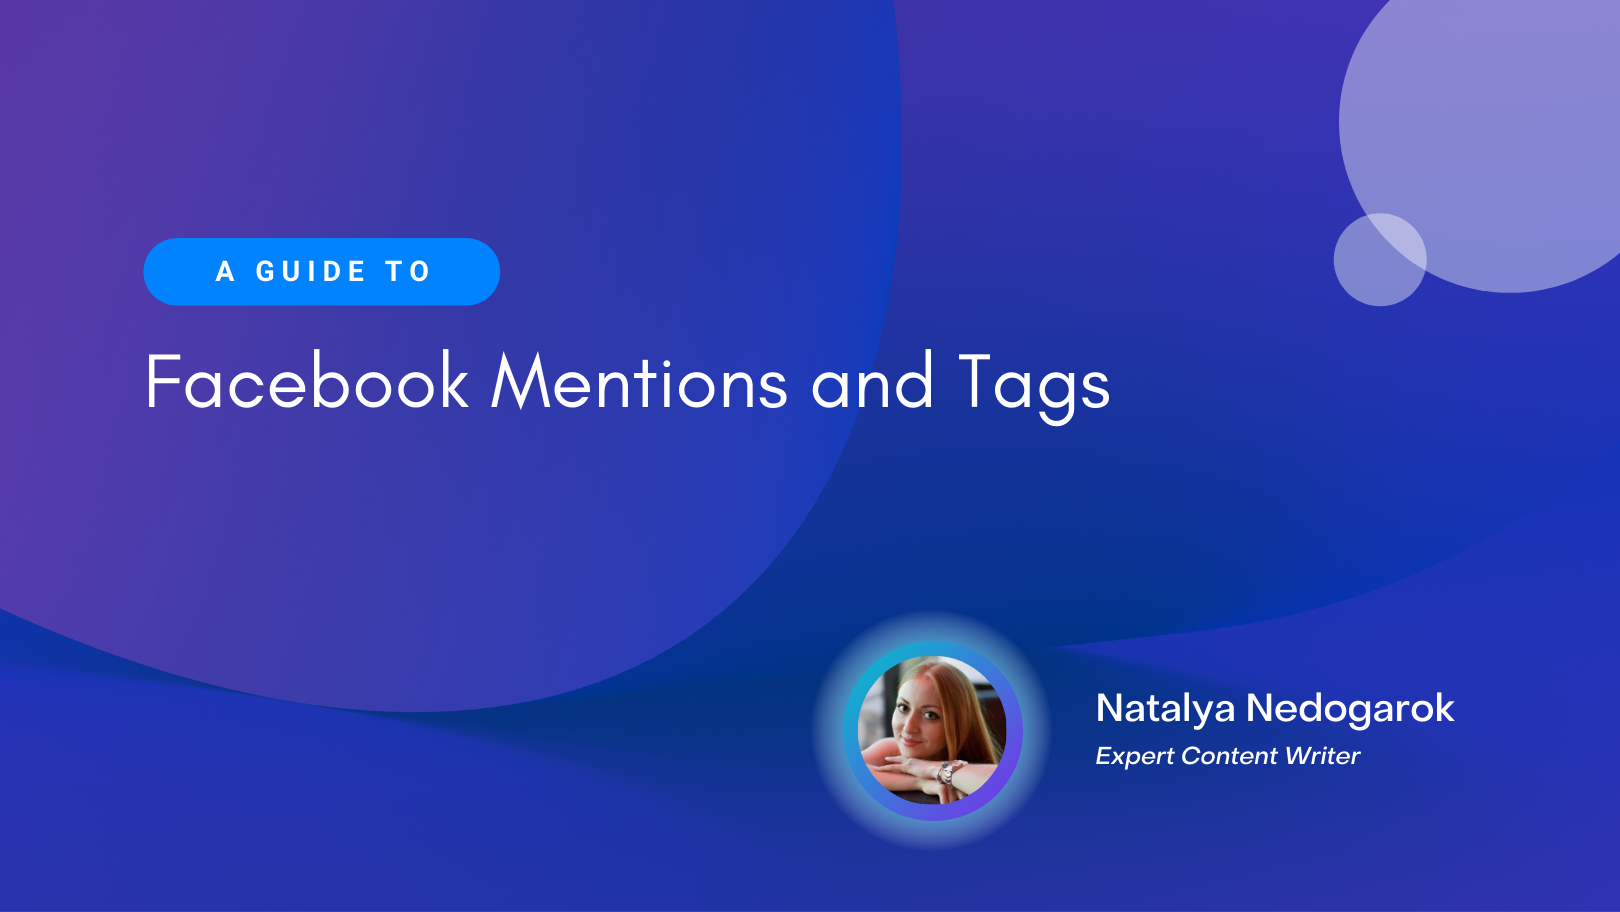 A Guide to Facebook Mentions and Tags